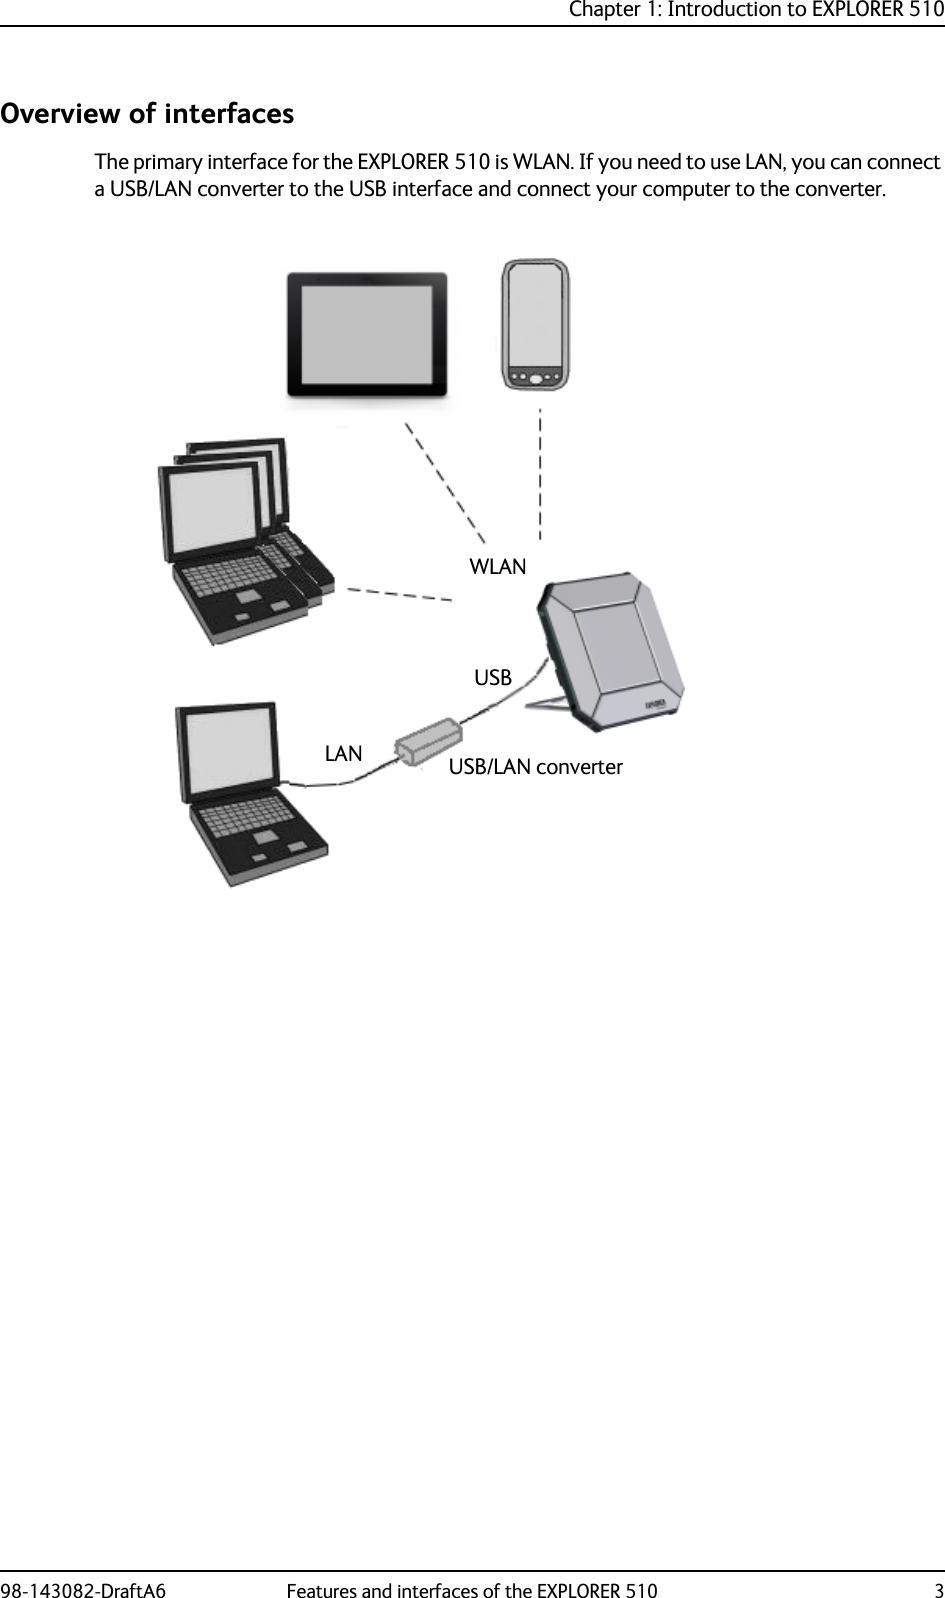 Chapter 1: Introduction to EXPLORER 51098-143082-DraftA6 Features and interfaces of the EXPLORER 510 3Overview of interfacesThe primary interface for the EXPLORER 510 is WLAN. If you need to use LAN, you can connect a USB/LAN converter to the USB interface and connect your computer to the converter.WLANLANUSBUSB/LAN converter